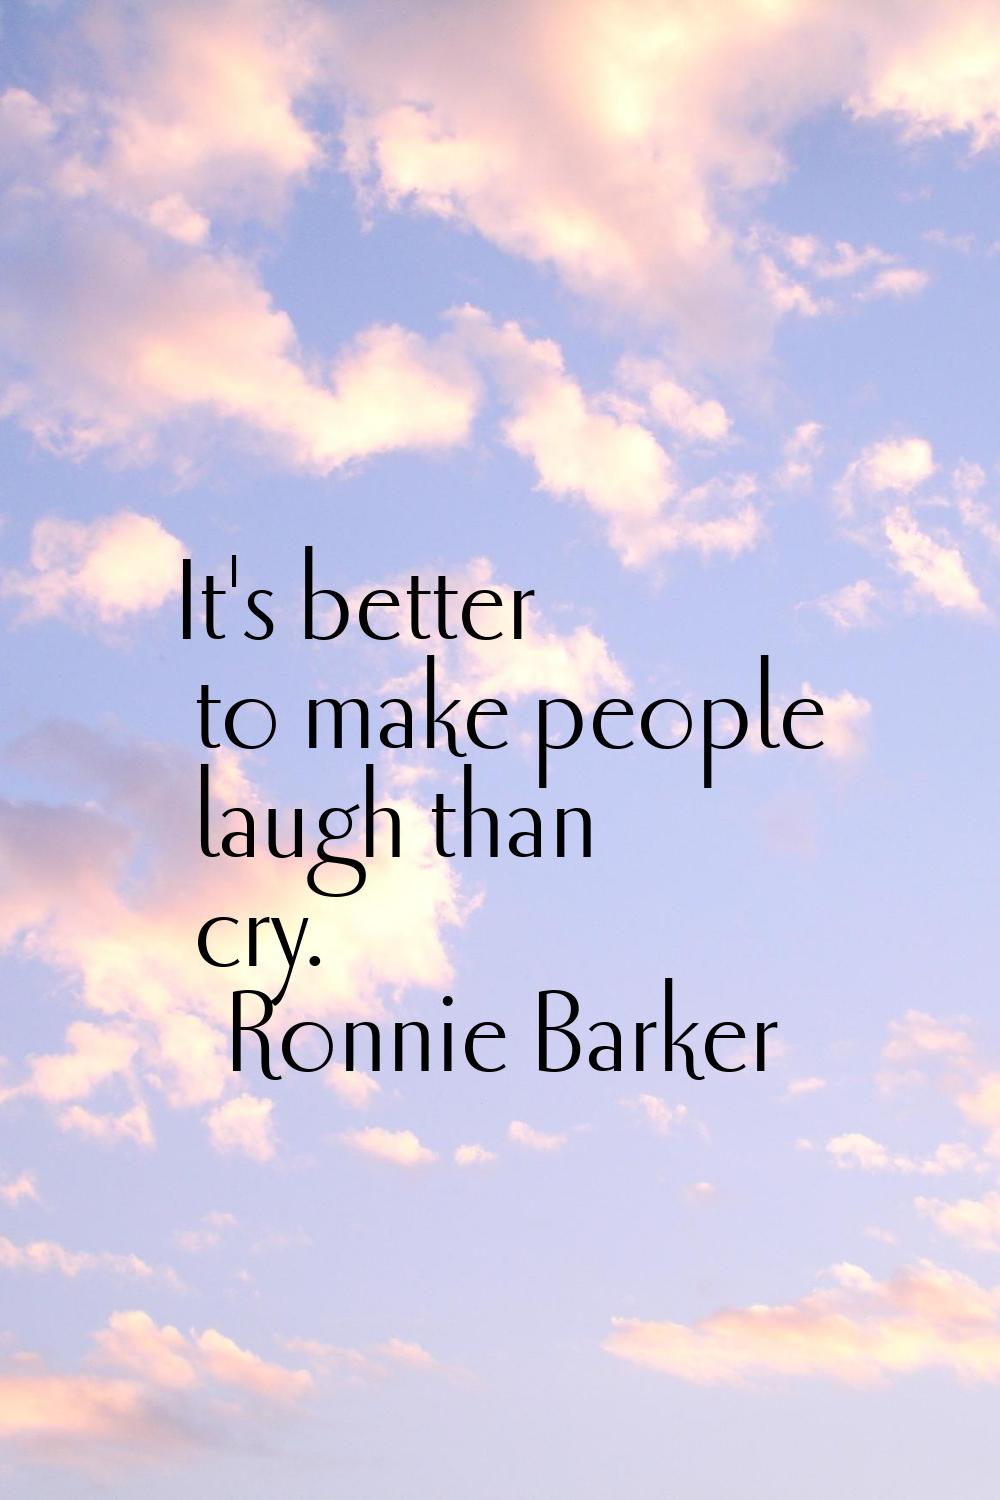 It's better to make people laugh than cry.